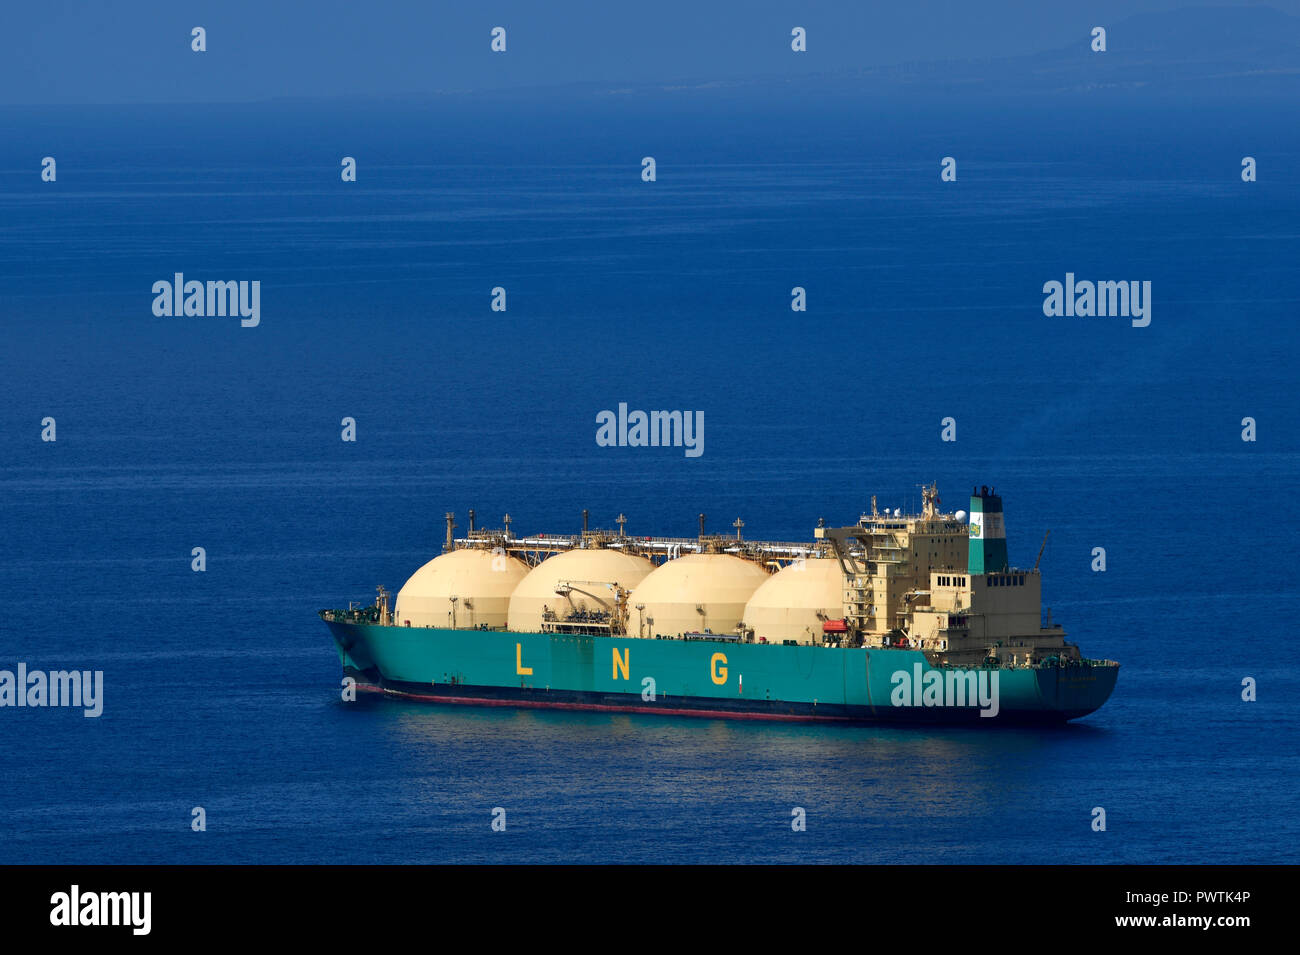 LNG Liquefied Natural Gas tank ship, Tenerife, Canary Islands, Spain Stock Photo